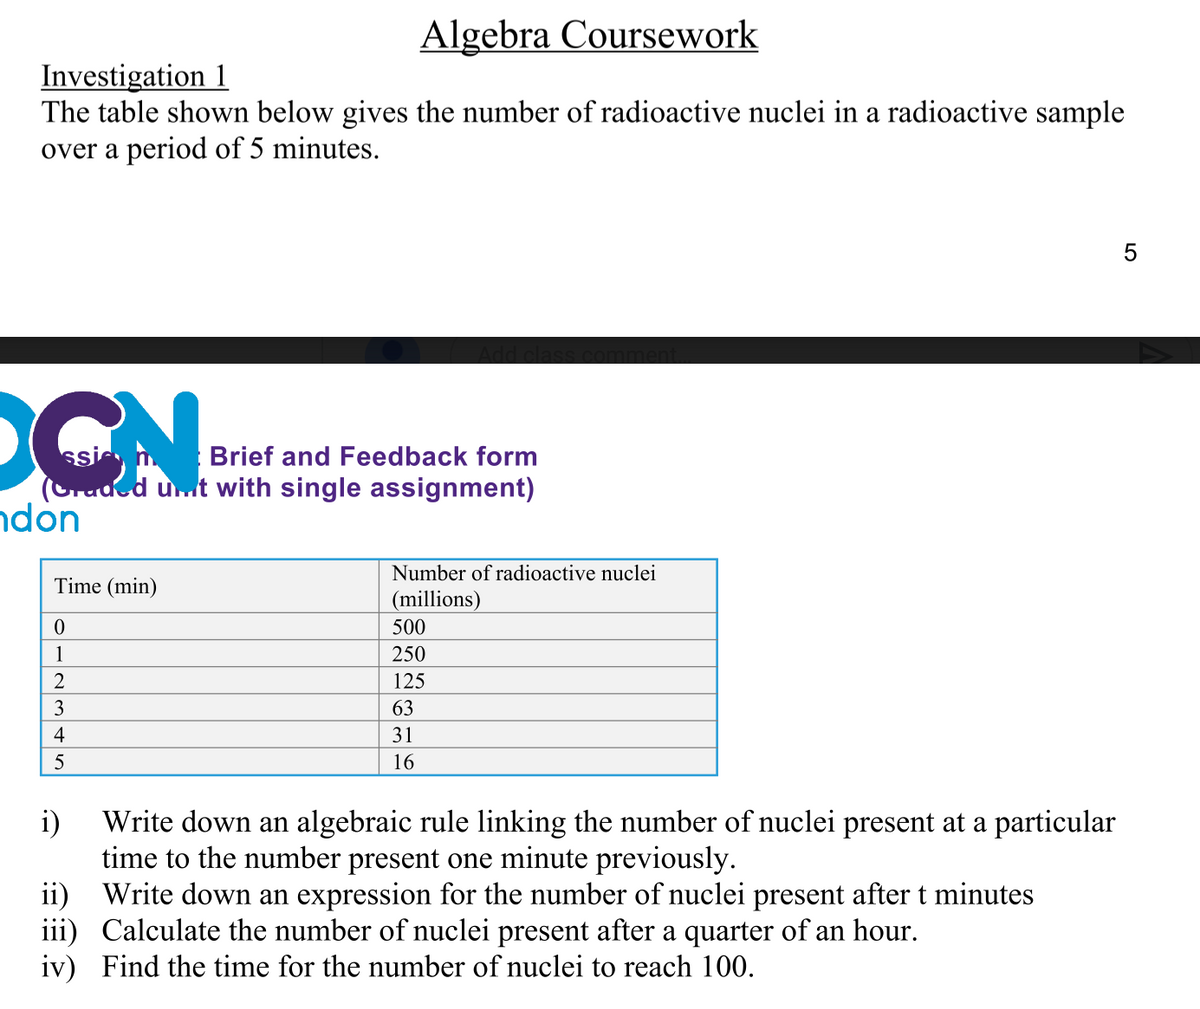 Algebra Coursework
Investigation 1
The table shown below gives the number of radioactive nuclei in a radioactive sample
over a period of 5 minutes.
5
DON
Brief and Feedback form
(Graded unt with single assignment)
ndon
Number of radioactive nuclei
Time (min)
(millions)
0
500
1
250
2
125
3
63
4
31
5
16
i)
Write down an algebraic rule linking the number of nuclei present at a particular
time to the number present one minute previously.
ii)
Write down an expression for the number of nuclei present after t minutes
Calculate the number of nuclei present after a quarter of an hour.
iii)
iv) Find the time for the number of nuclei to reach 100.